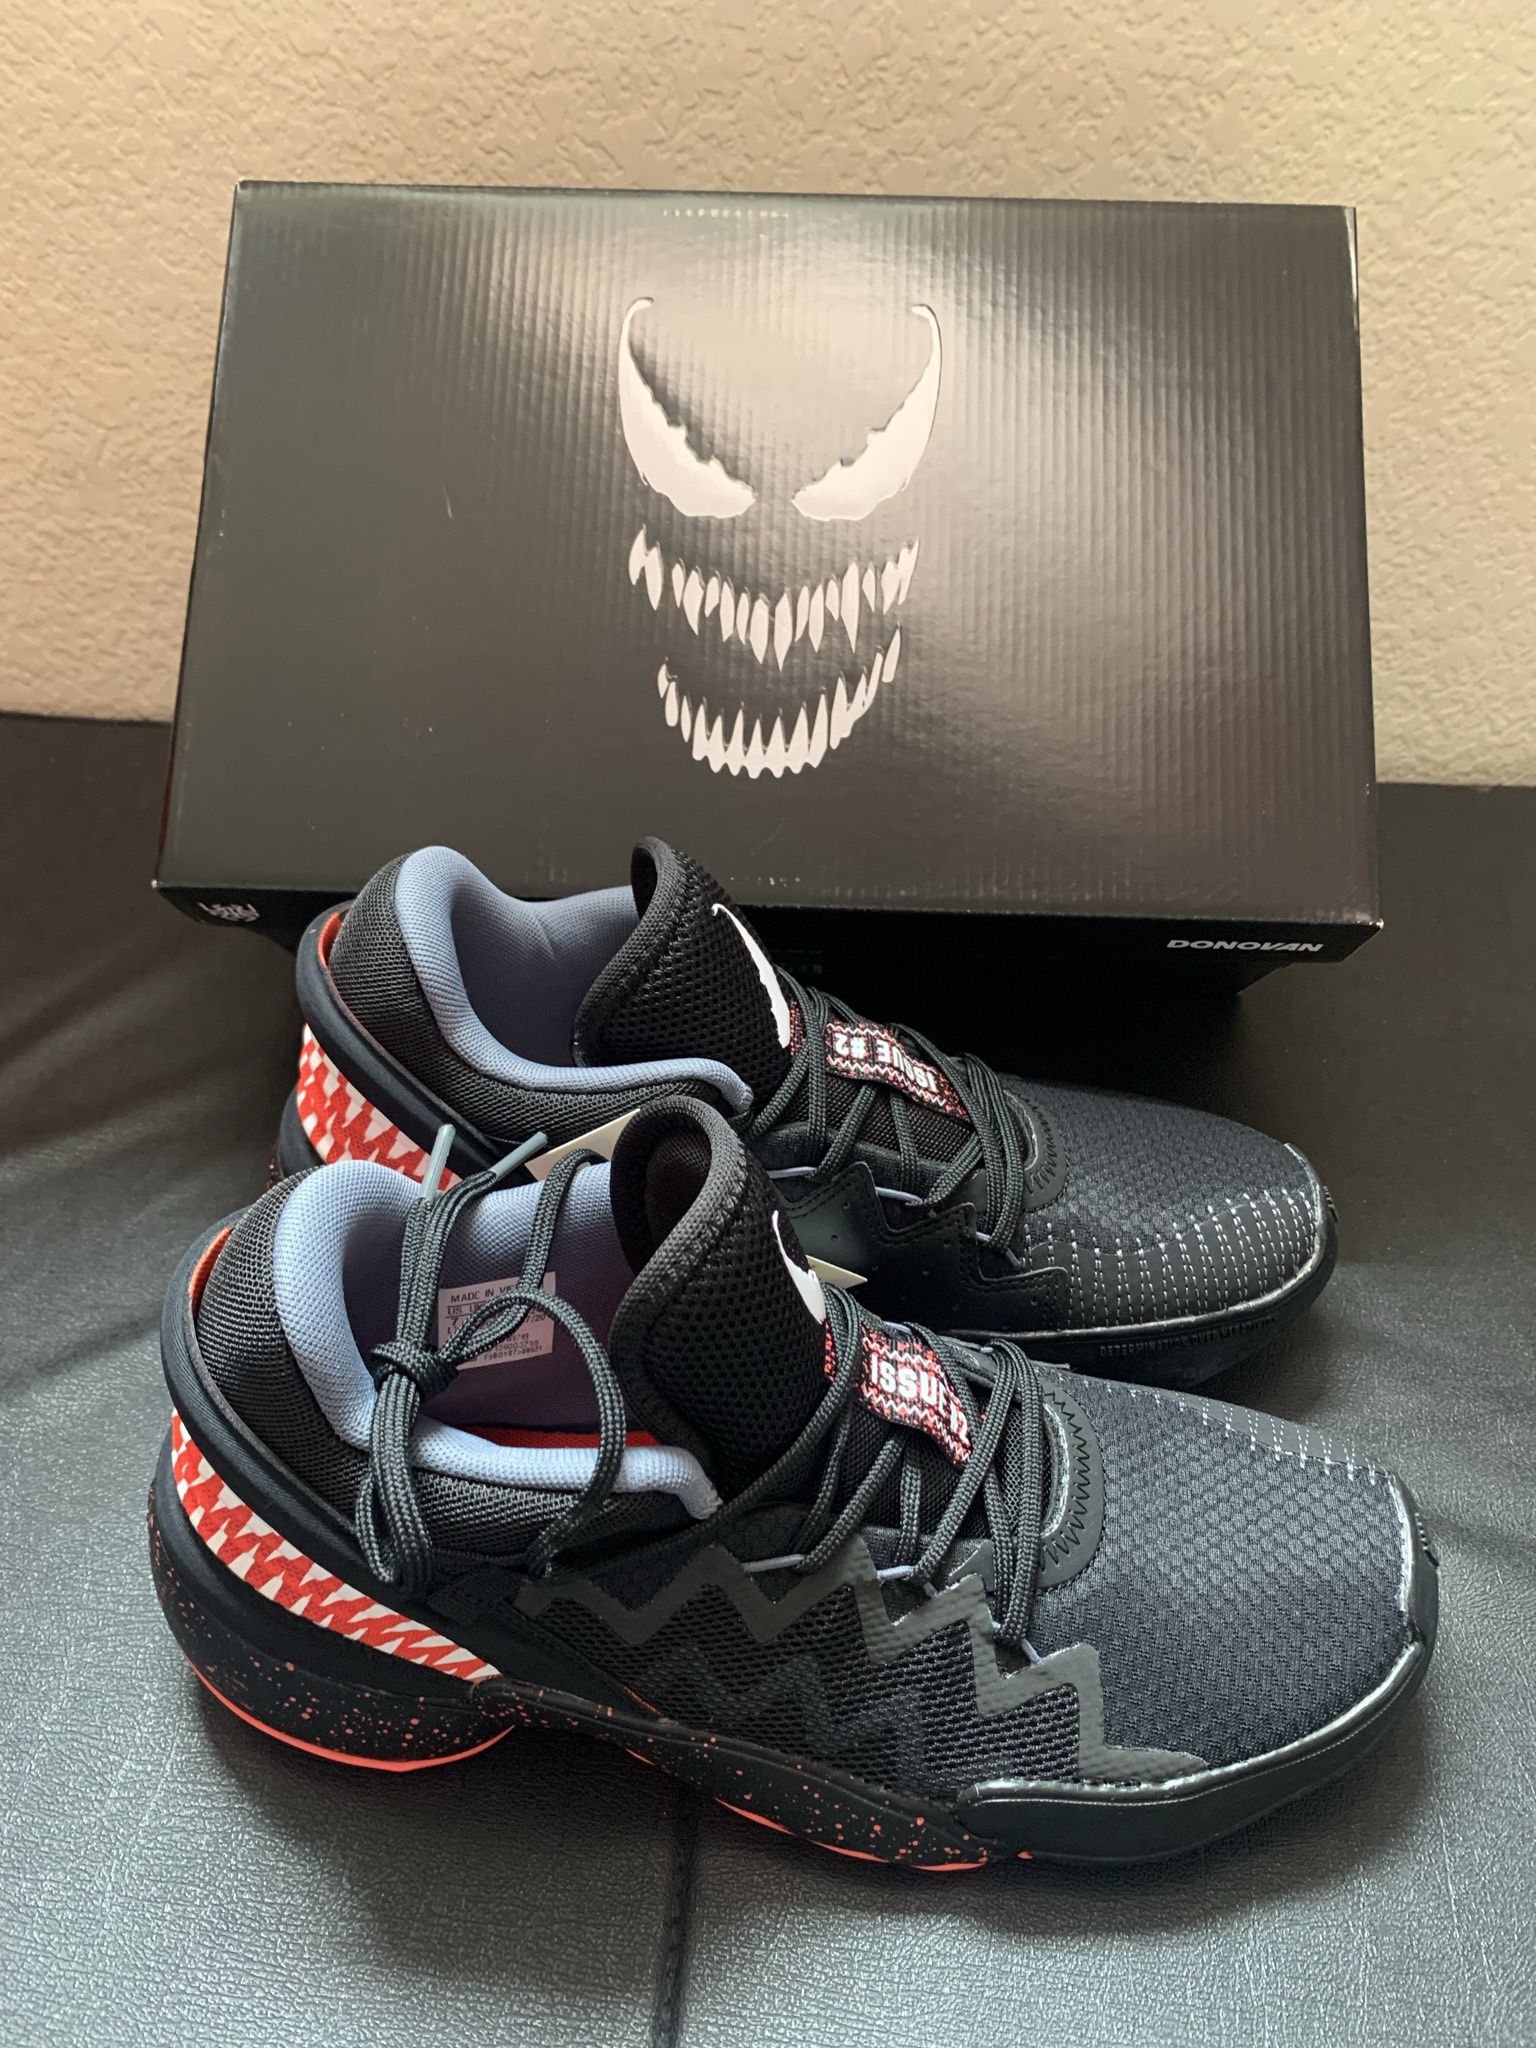 Adidas Issue Venom Basketball Sneakers for Sale in Anaheim, CA - OfferUp